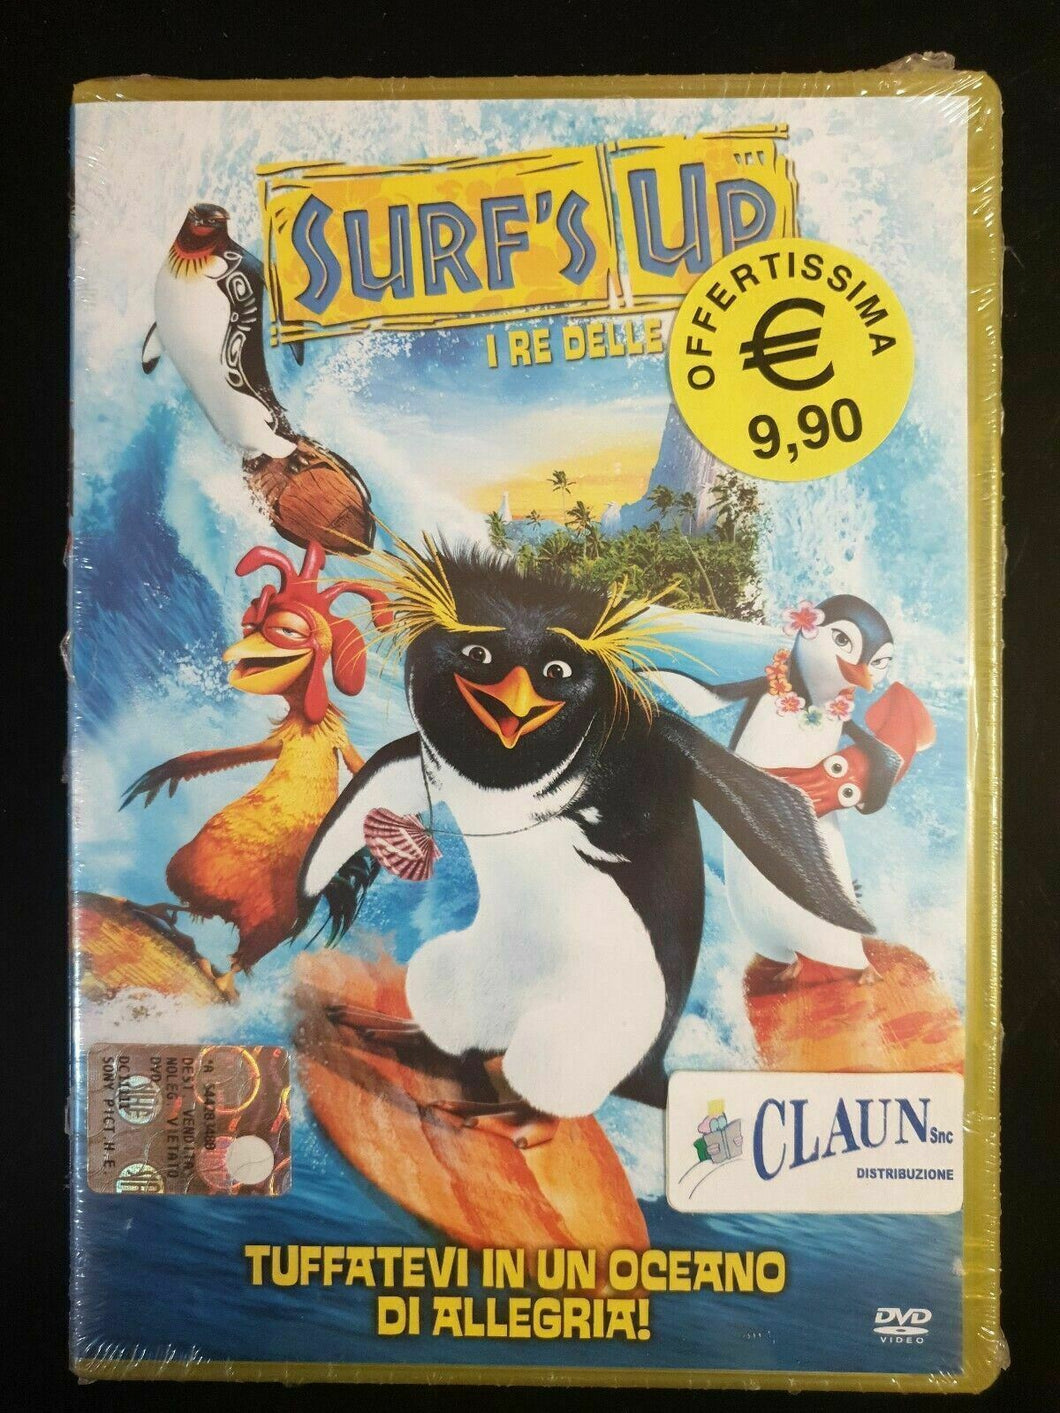 Surf's Up. I re delle onde (2007) DVD Nuovo